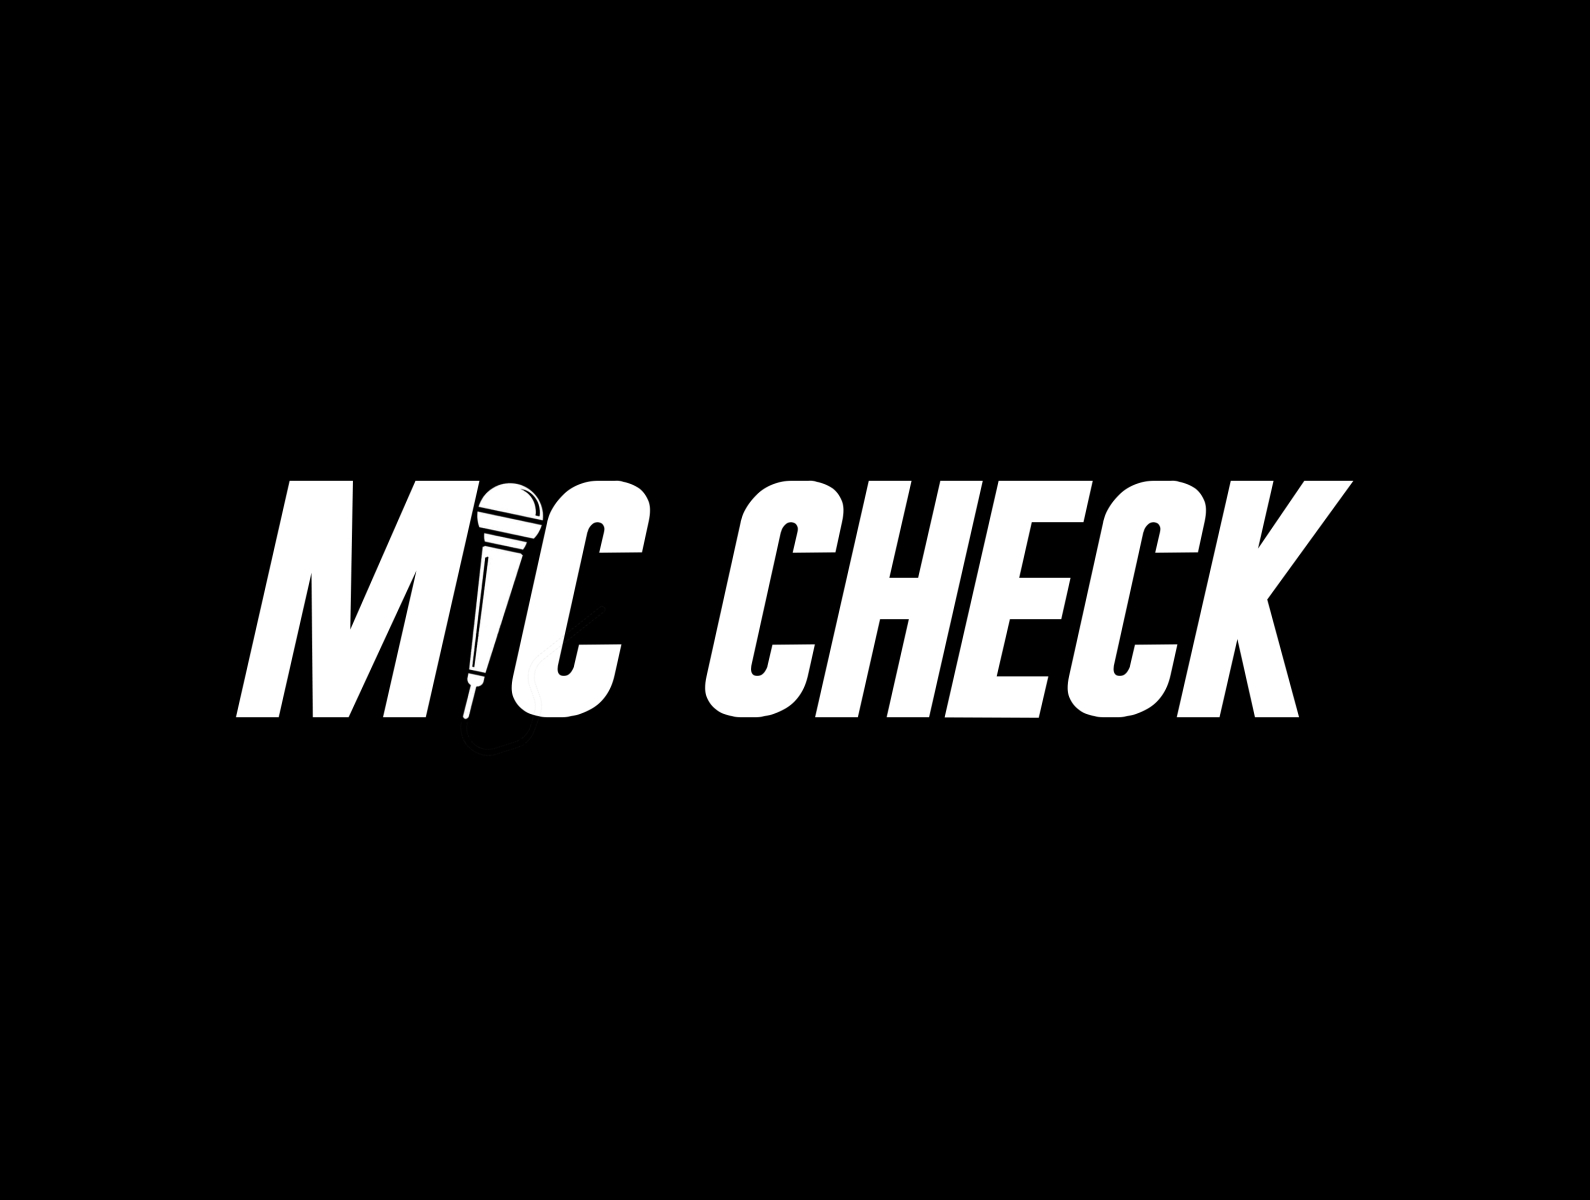 Mic Check by GFAB on Dribbble